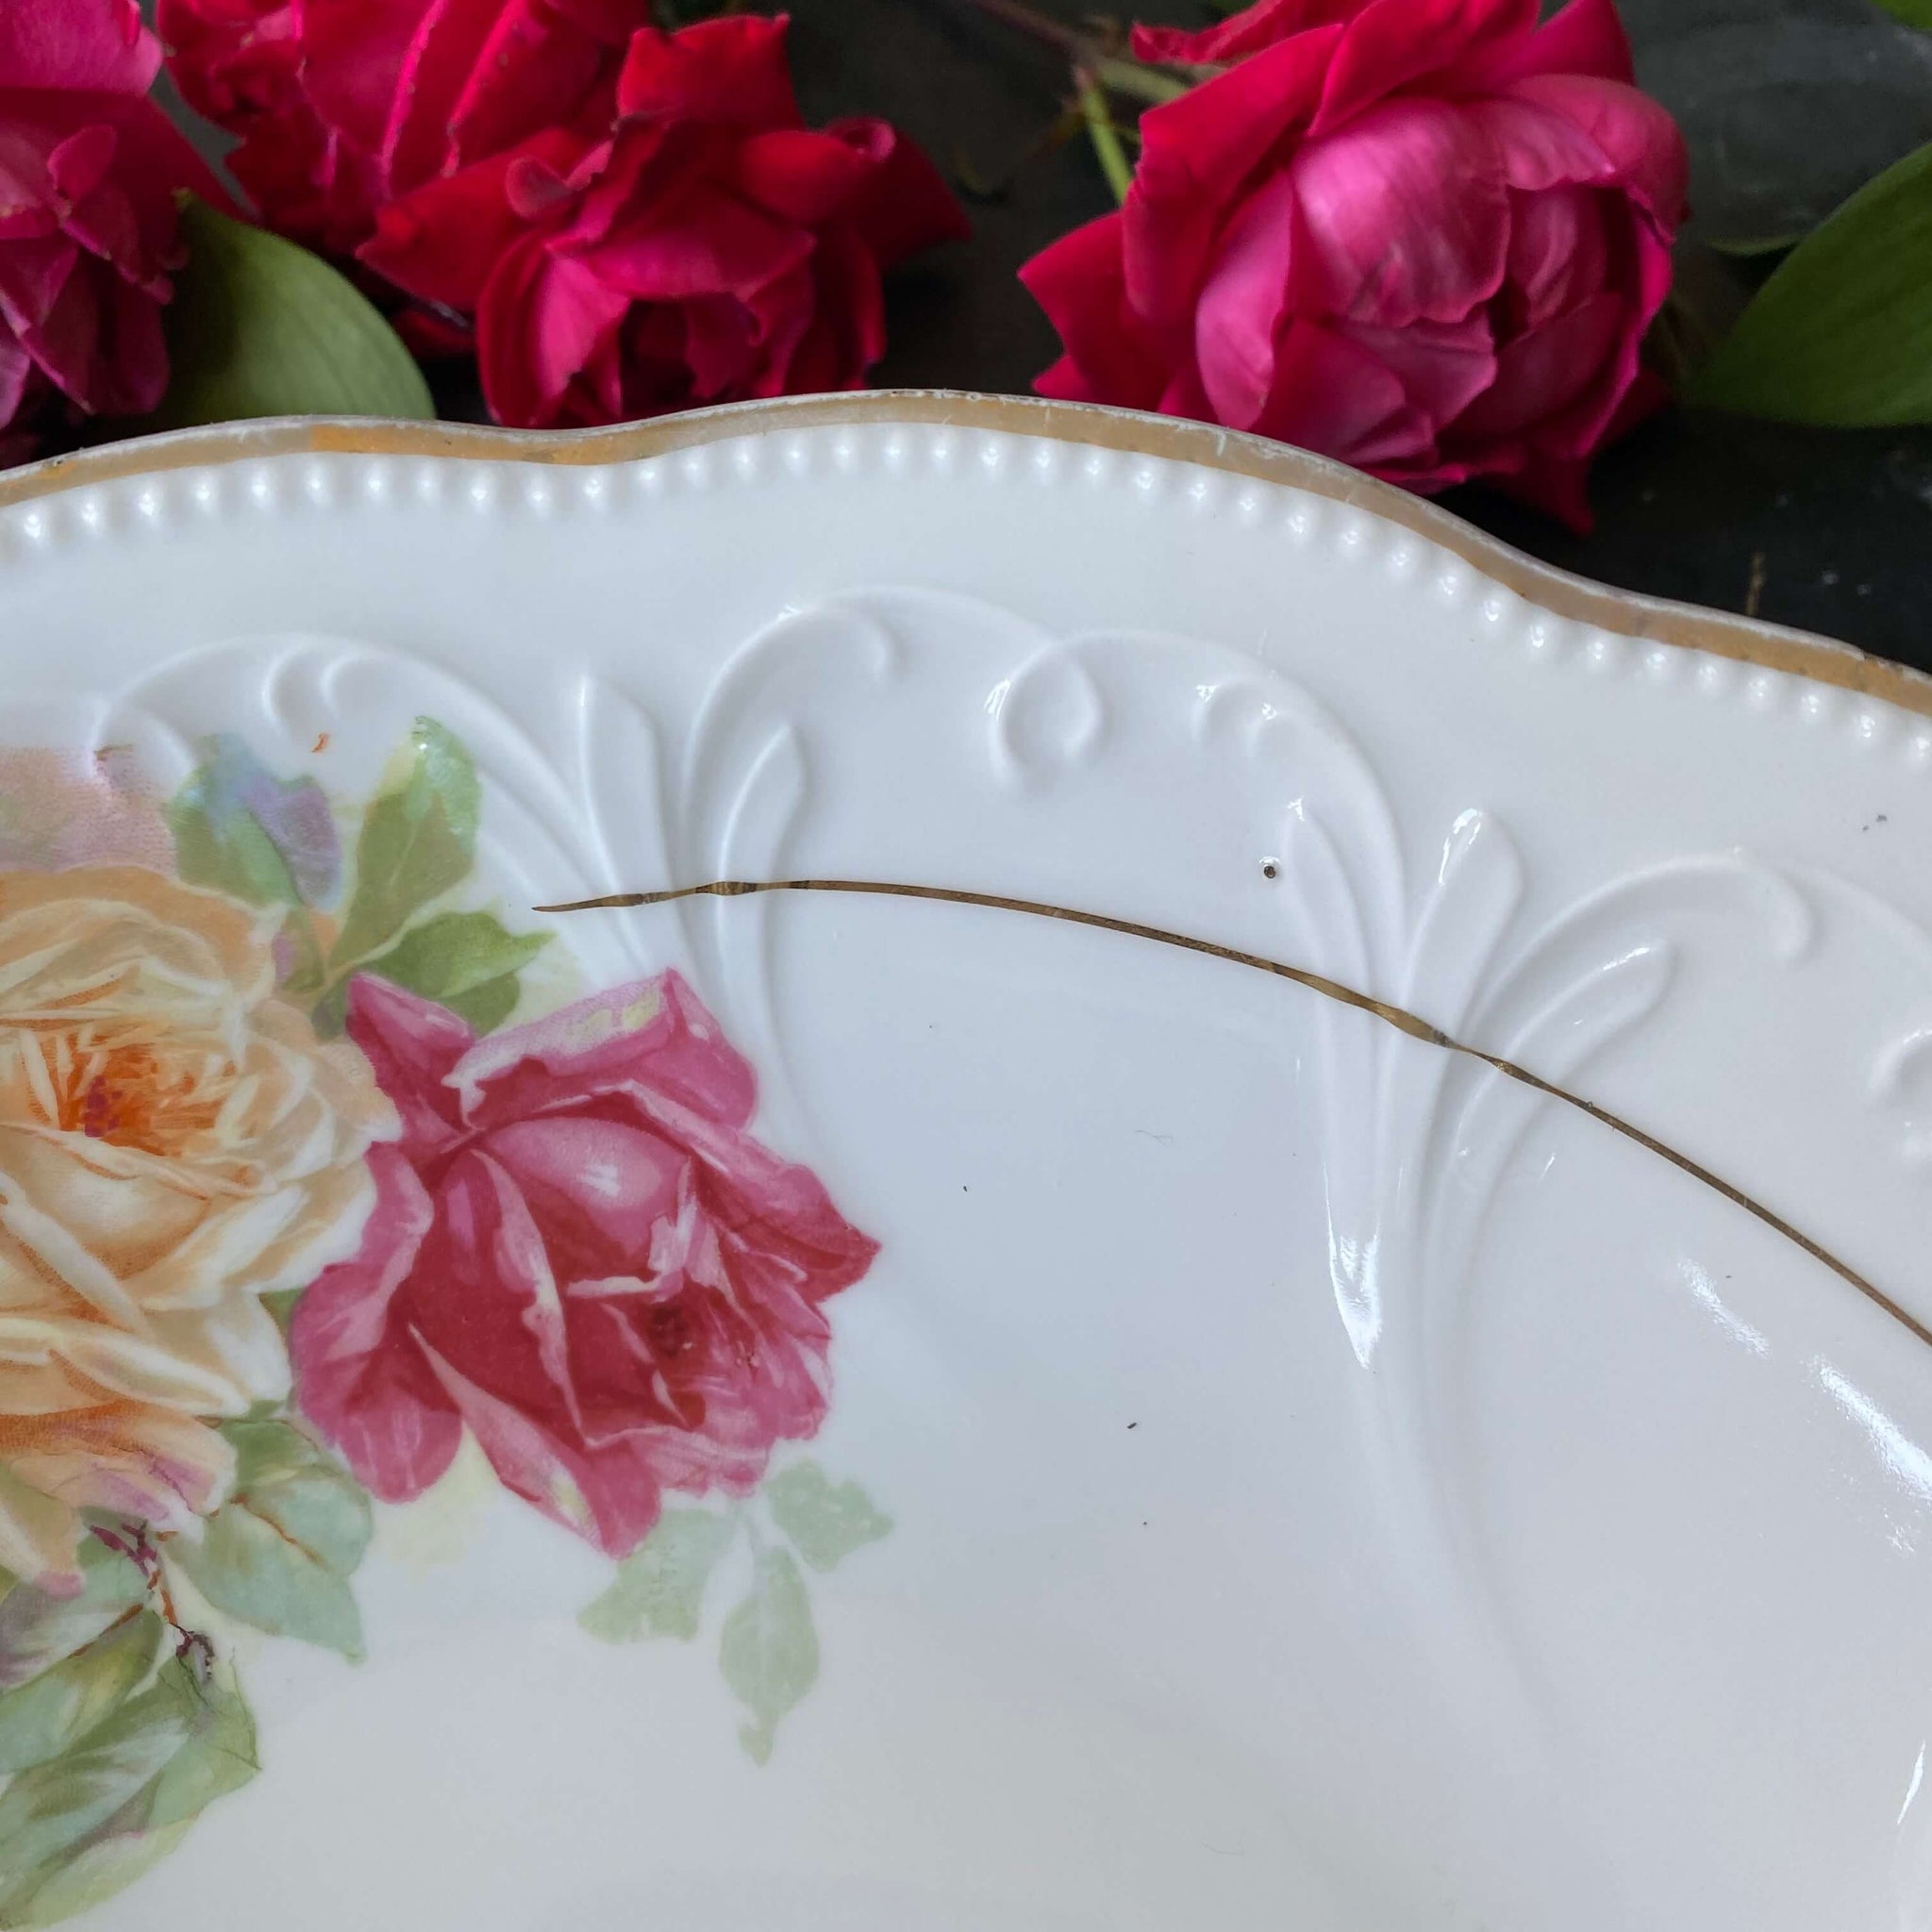 Antique Porcelain Bowl with Pink and Peach Roses and Embossed Detailing